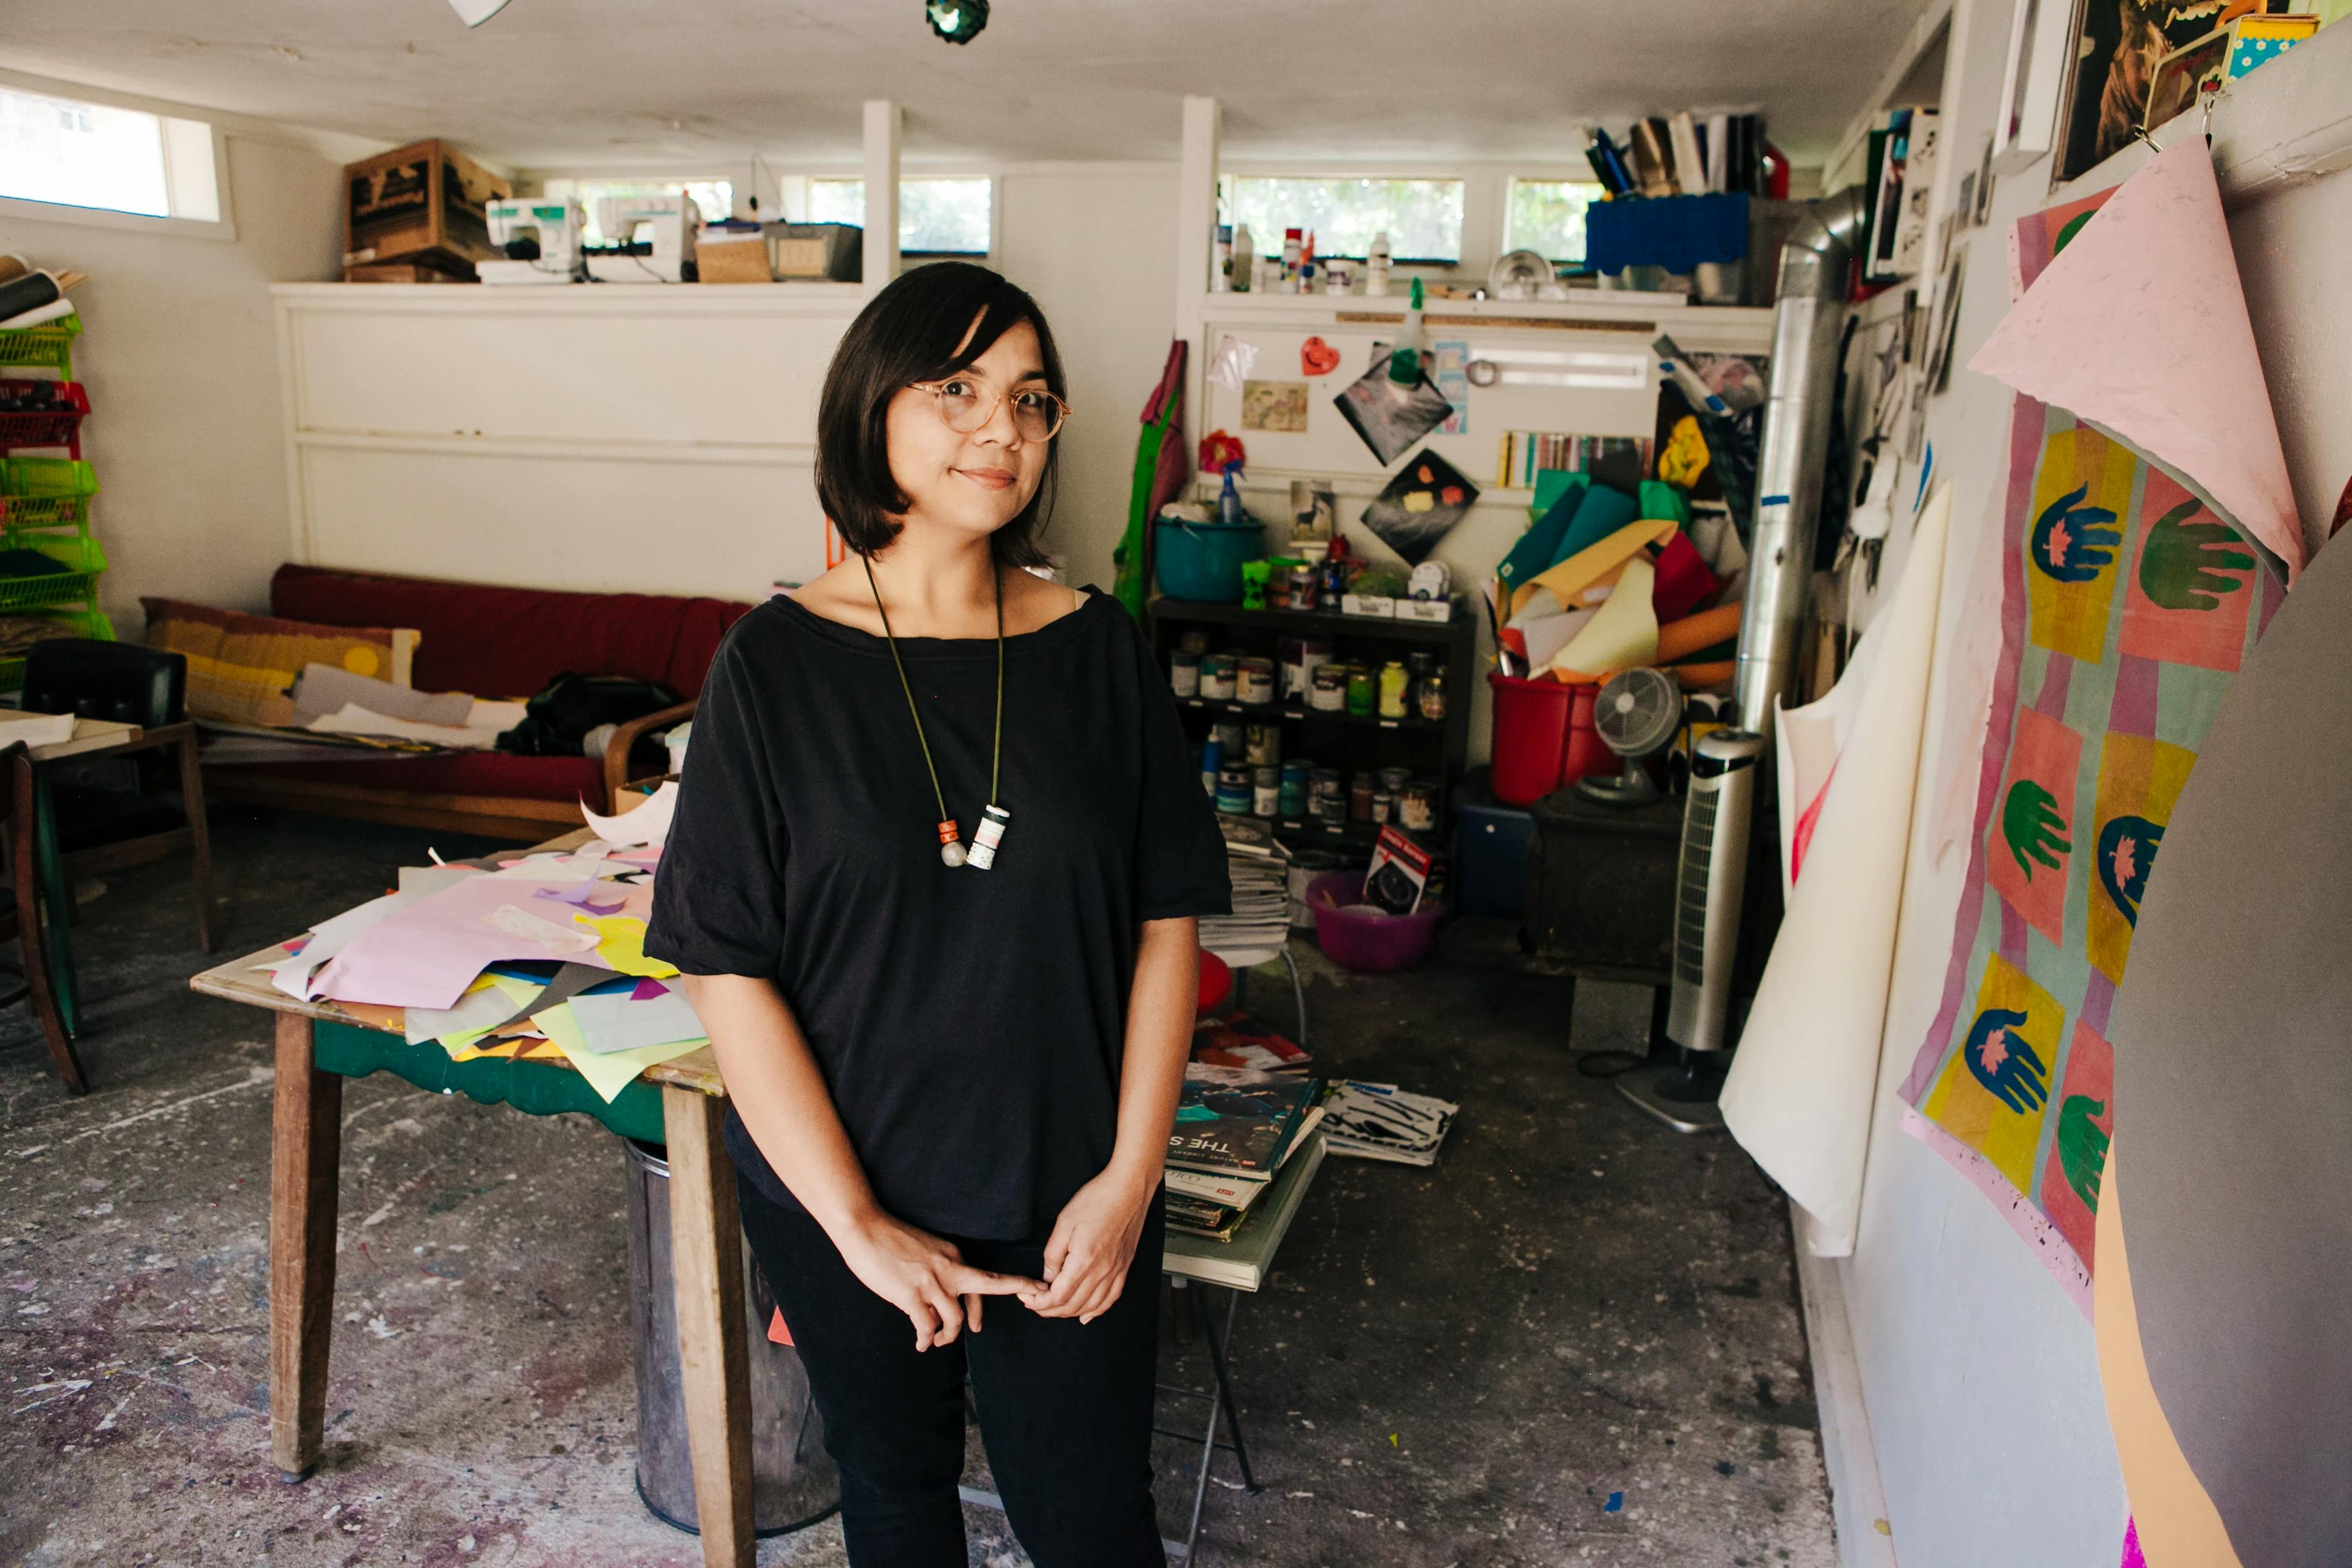 Journal: Visit with Xochi Solis: Gallery